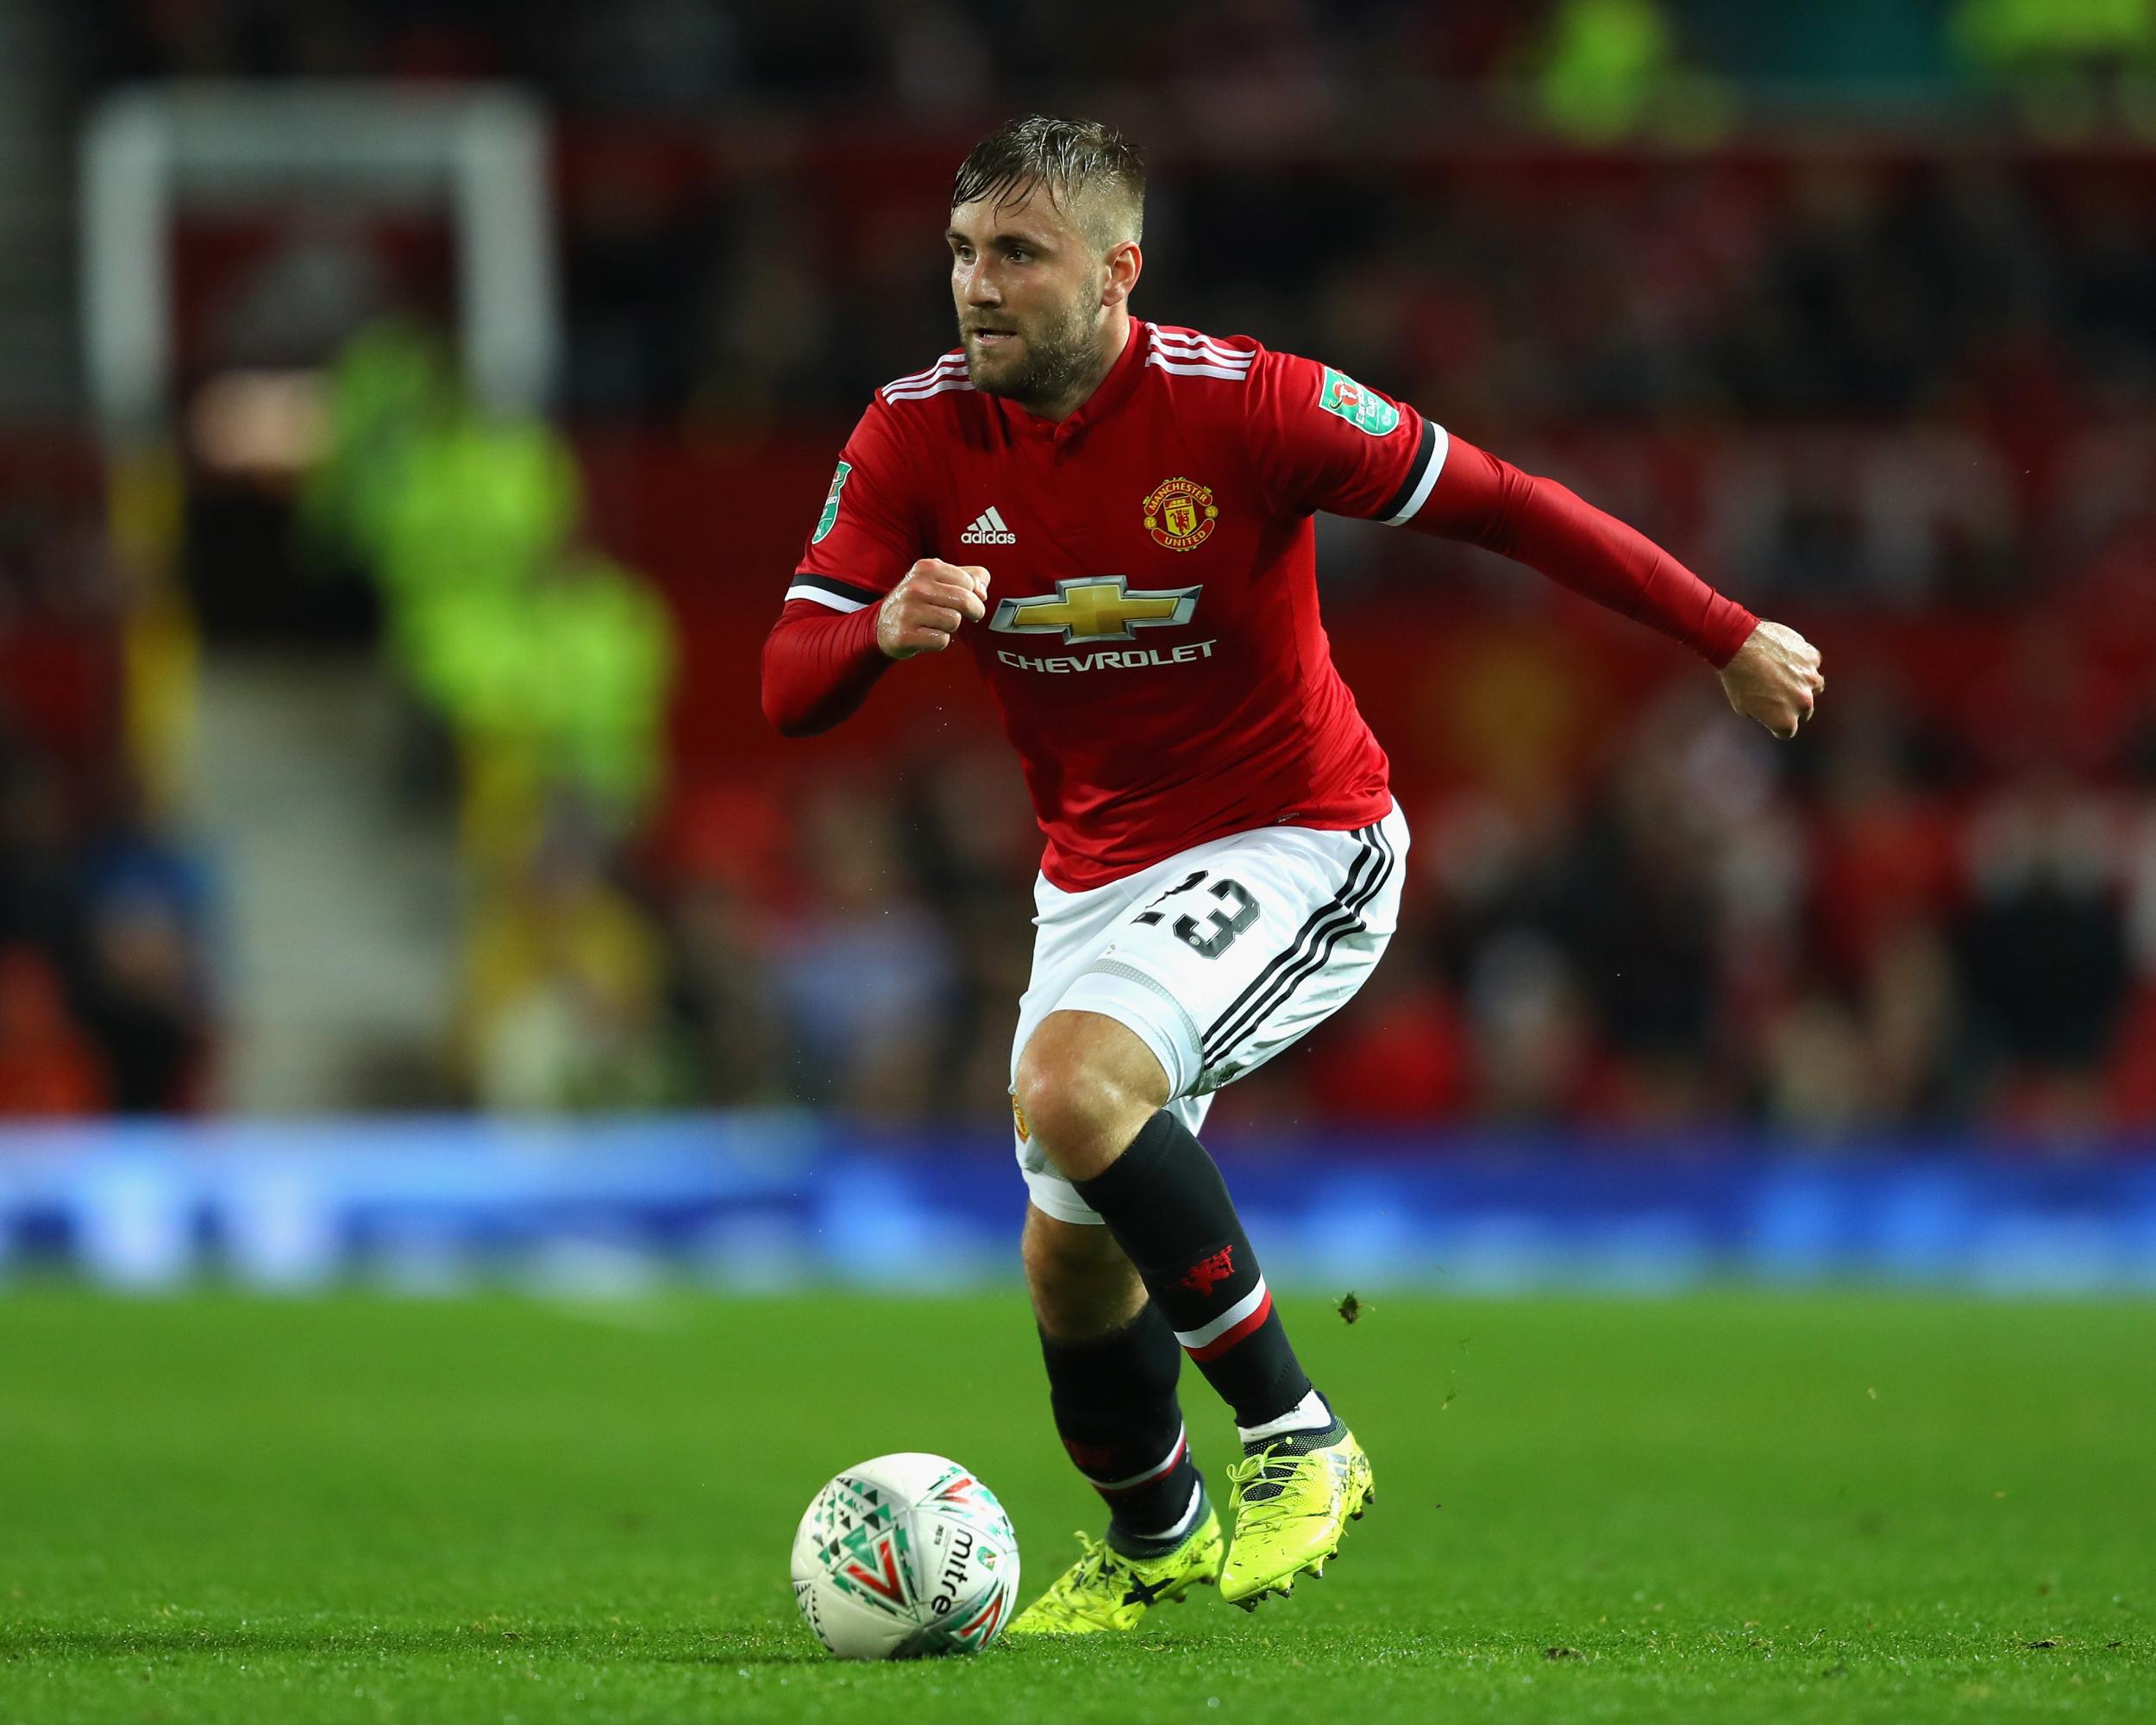 Shaw has failed to live up to expectation at United since joining